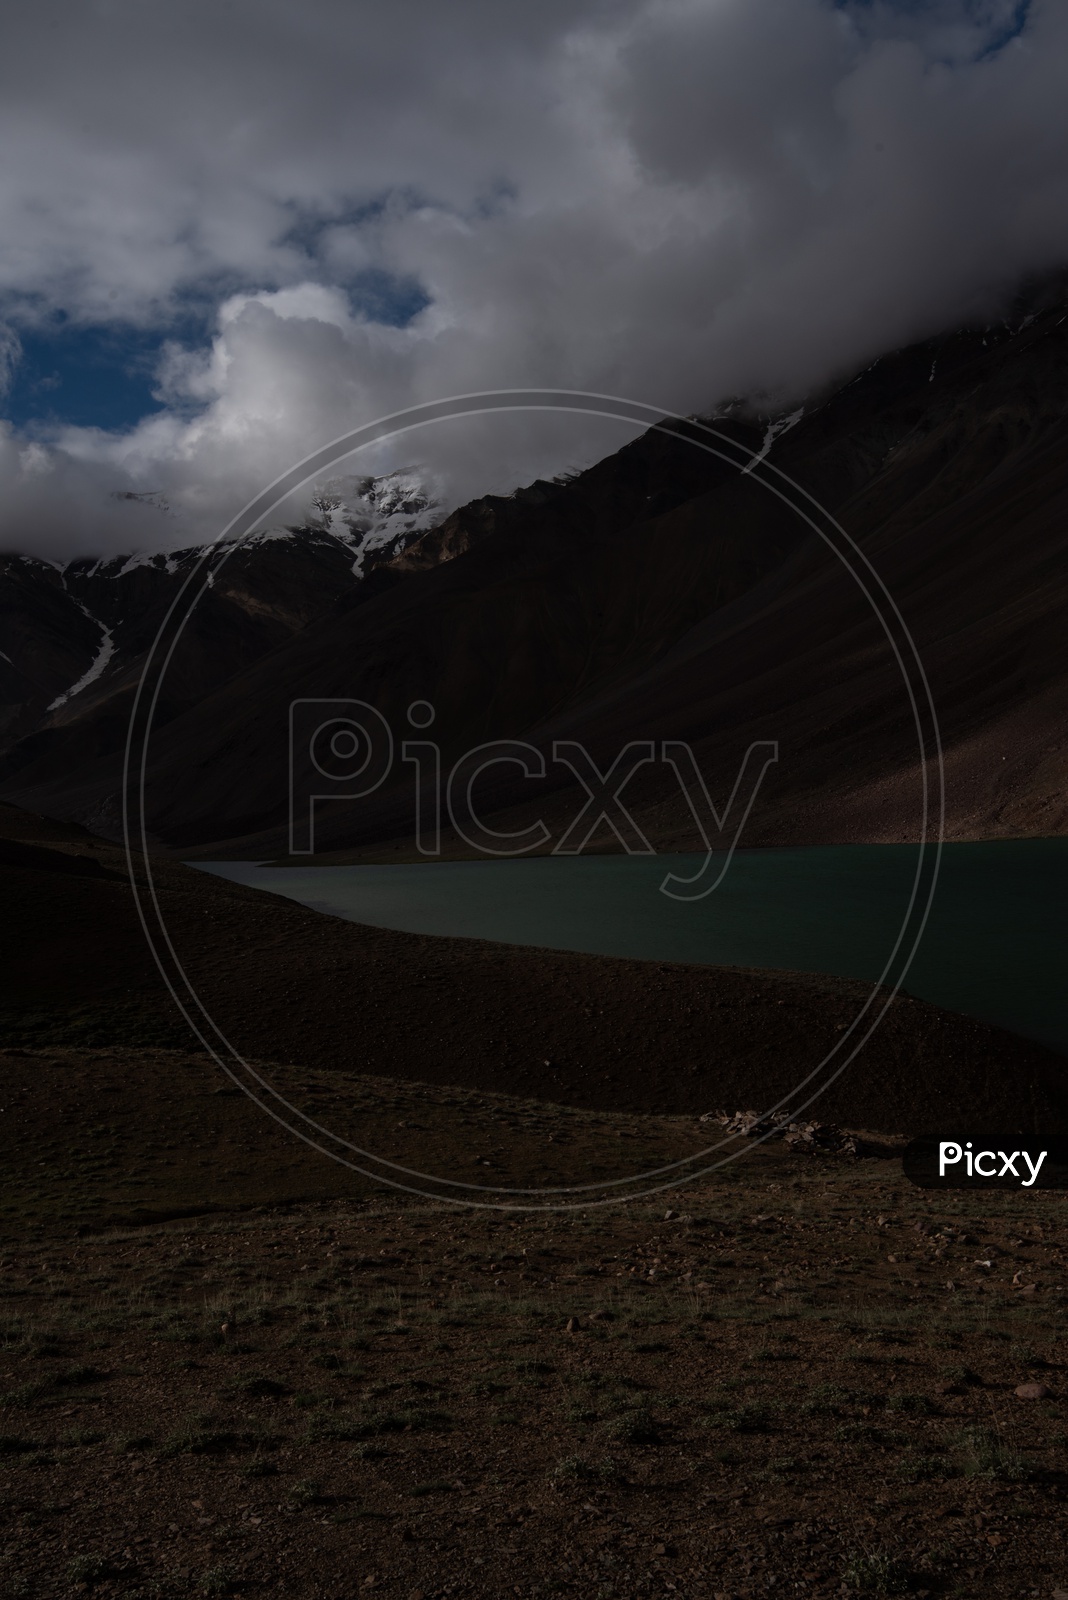 River Valleys In Leh / Ladakh With Mountains In Background and Clouds in Sky